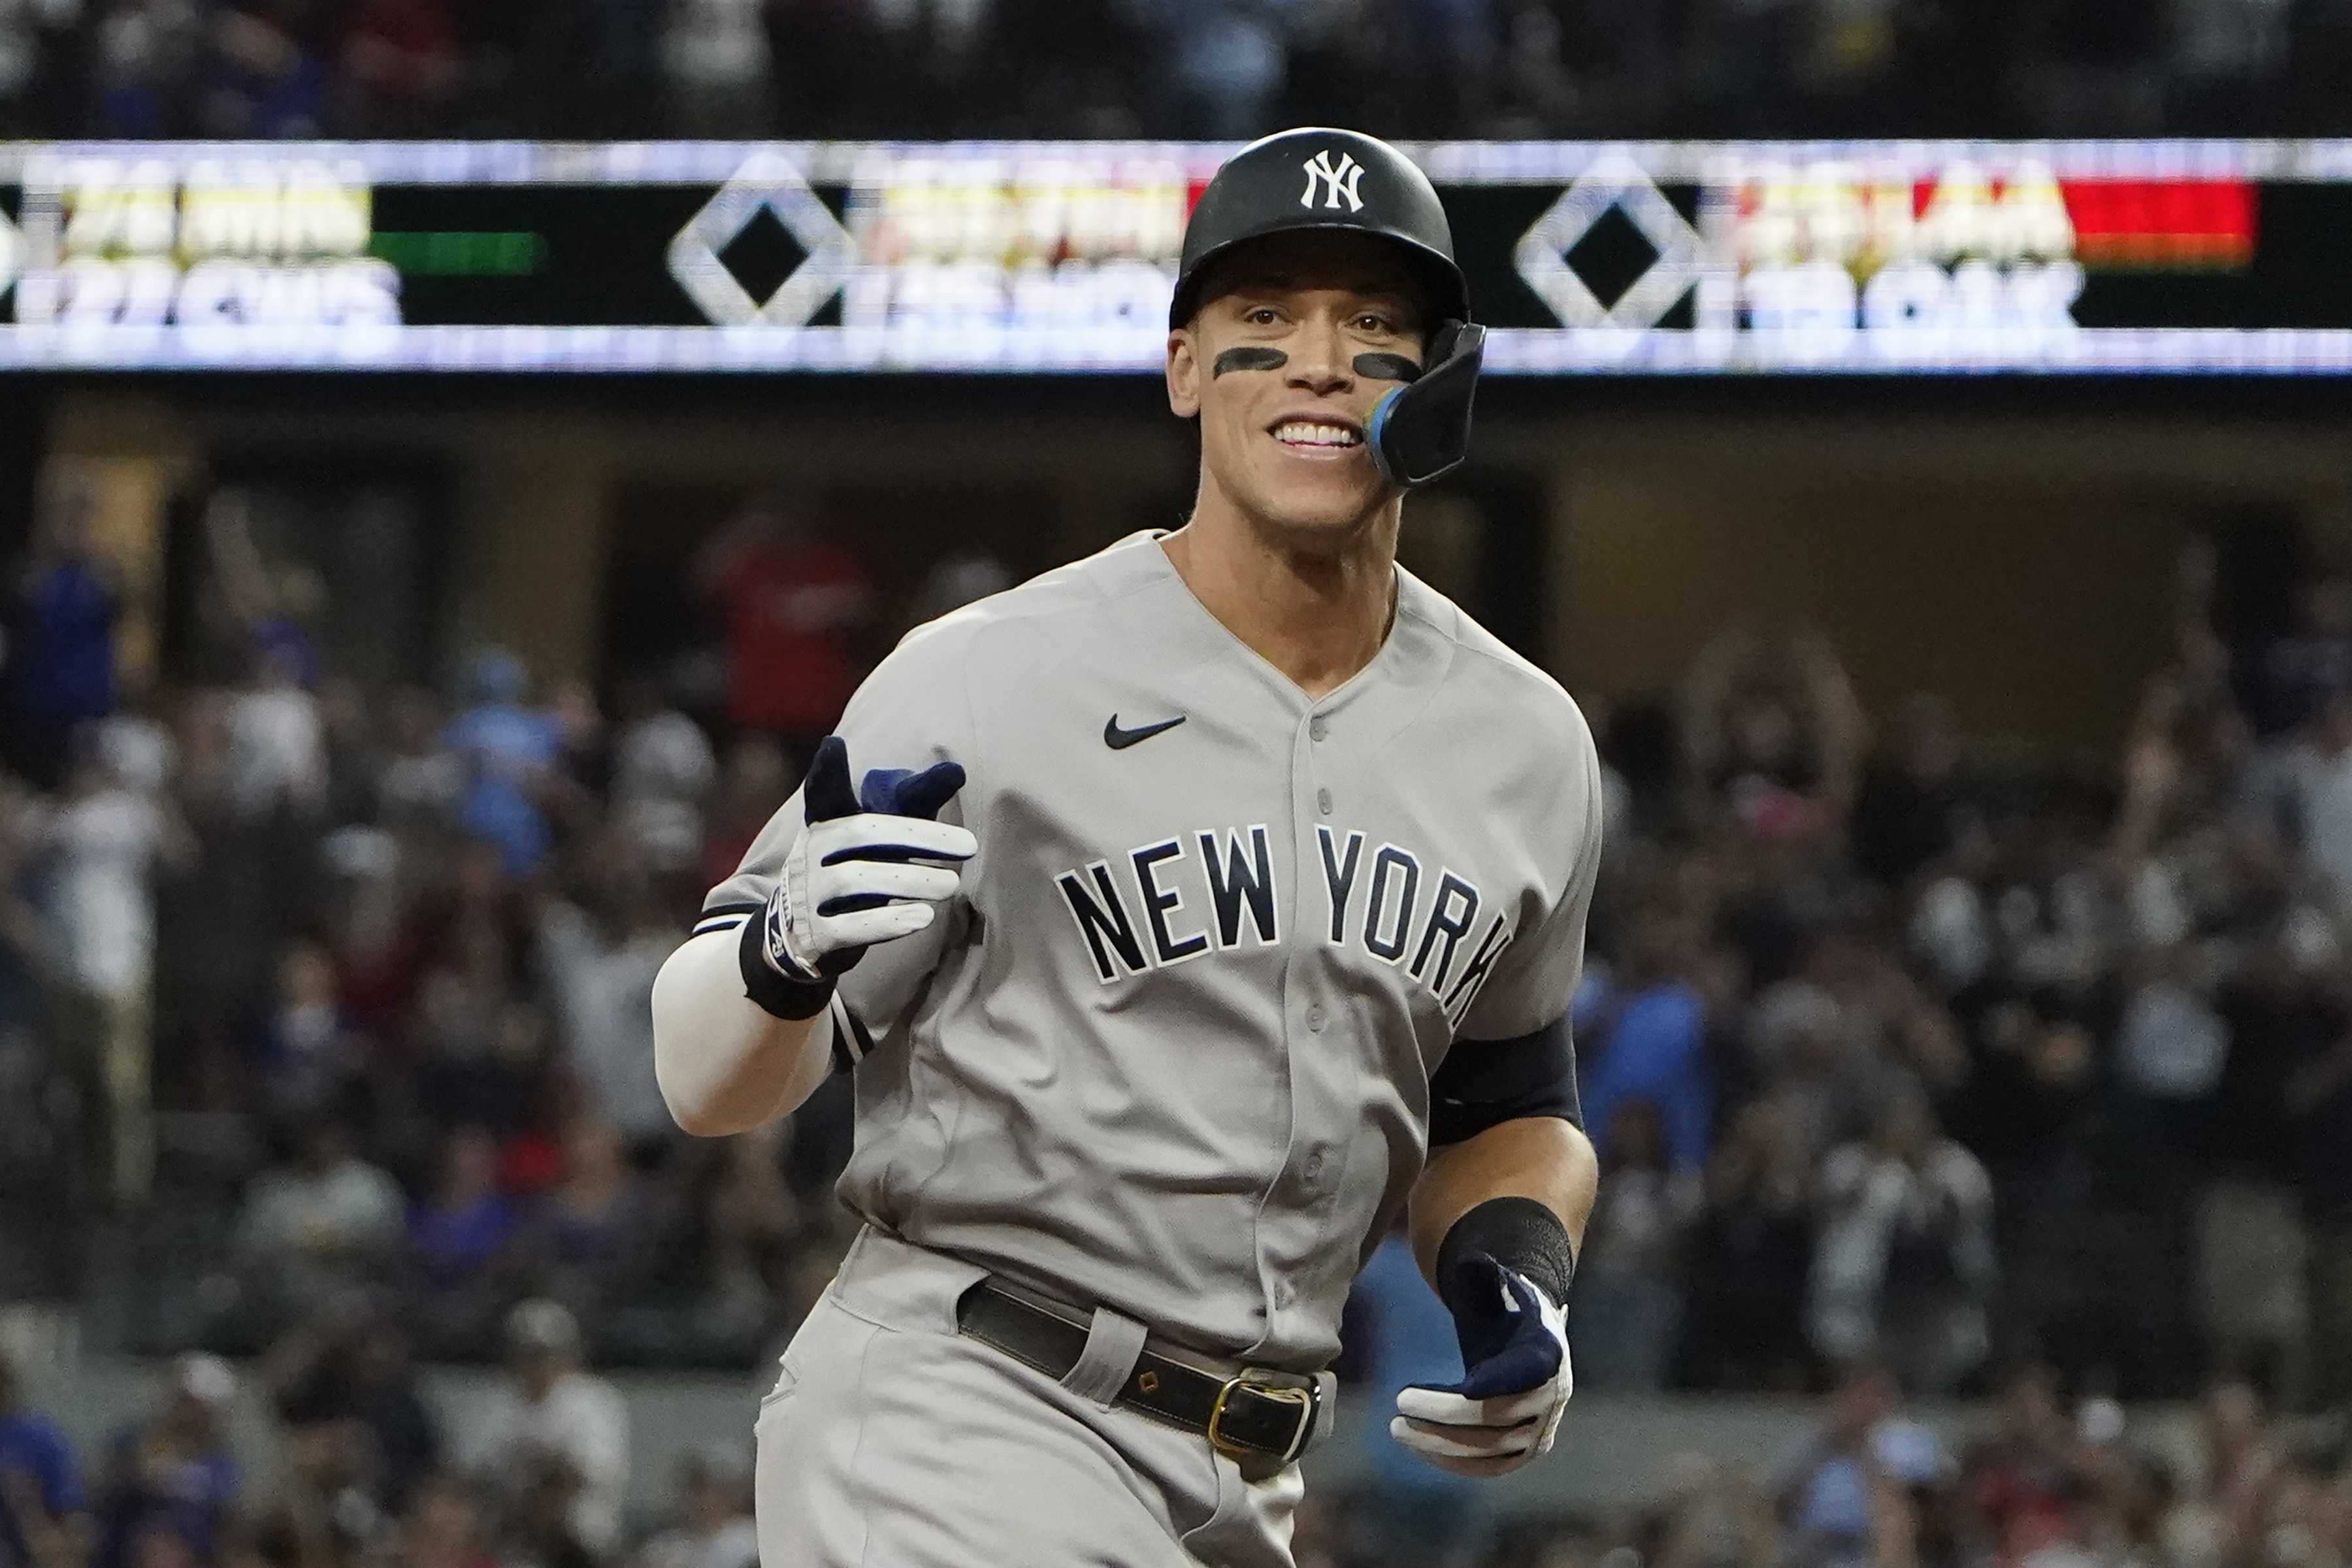 Aaron Judge on Barry Bonds: The record is the record